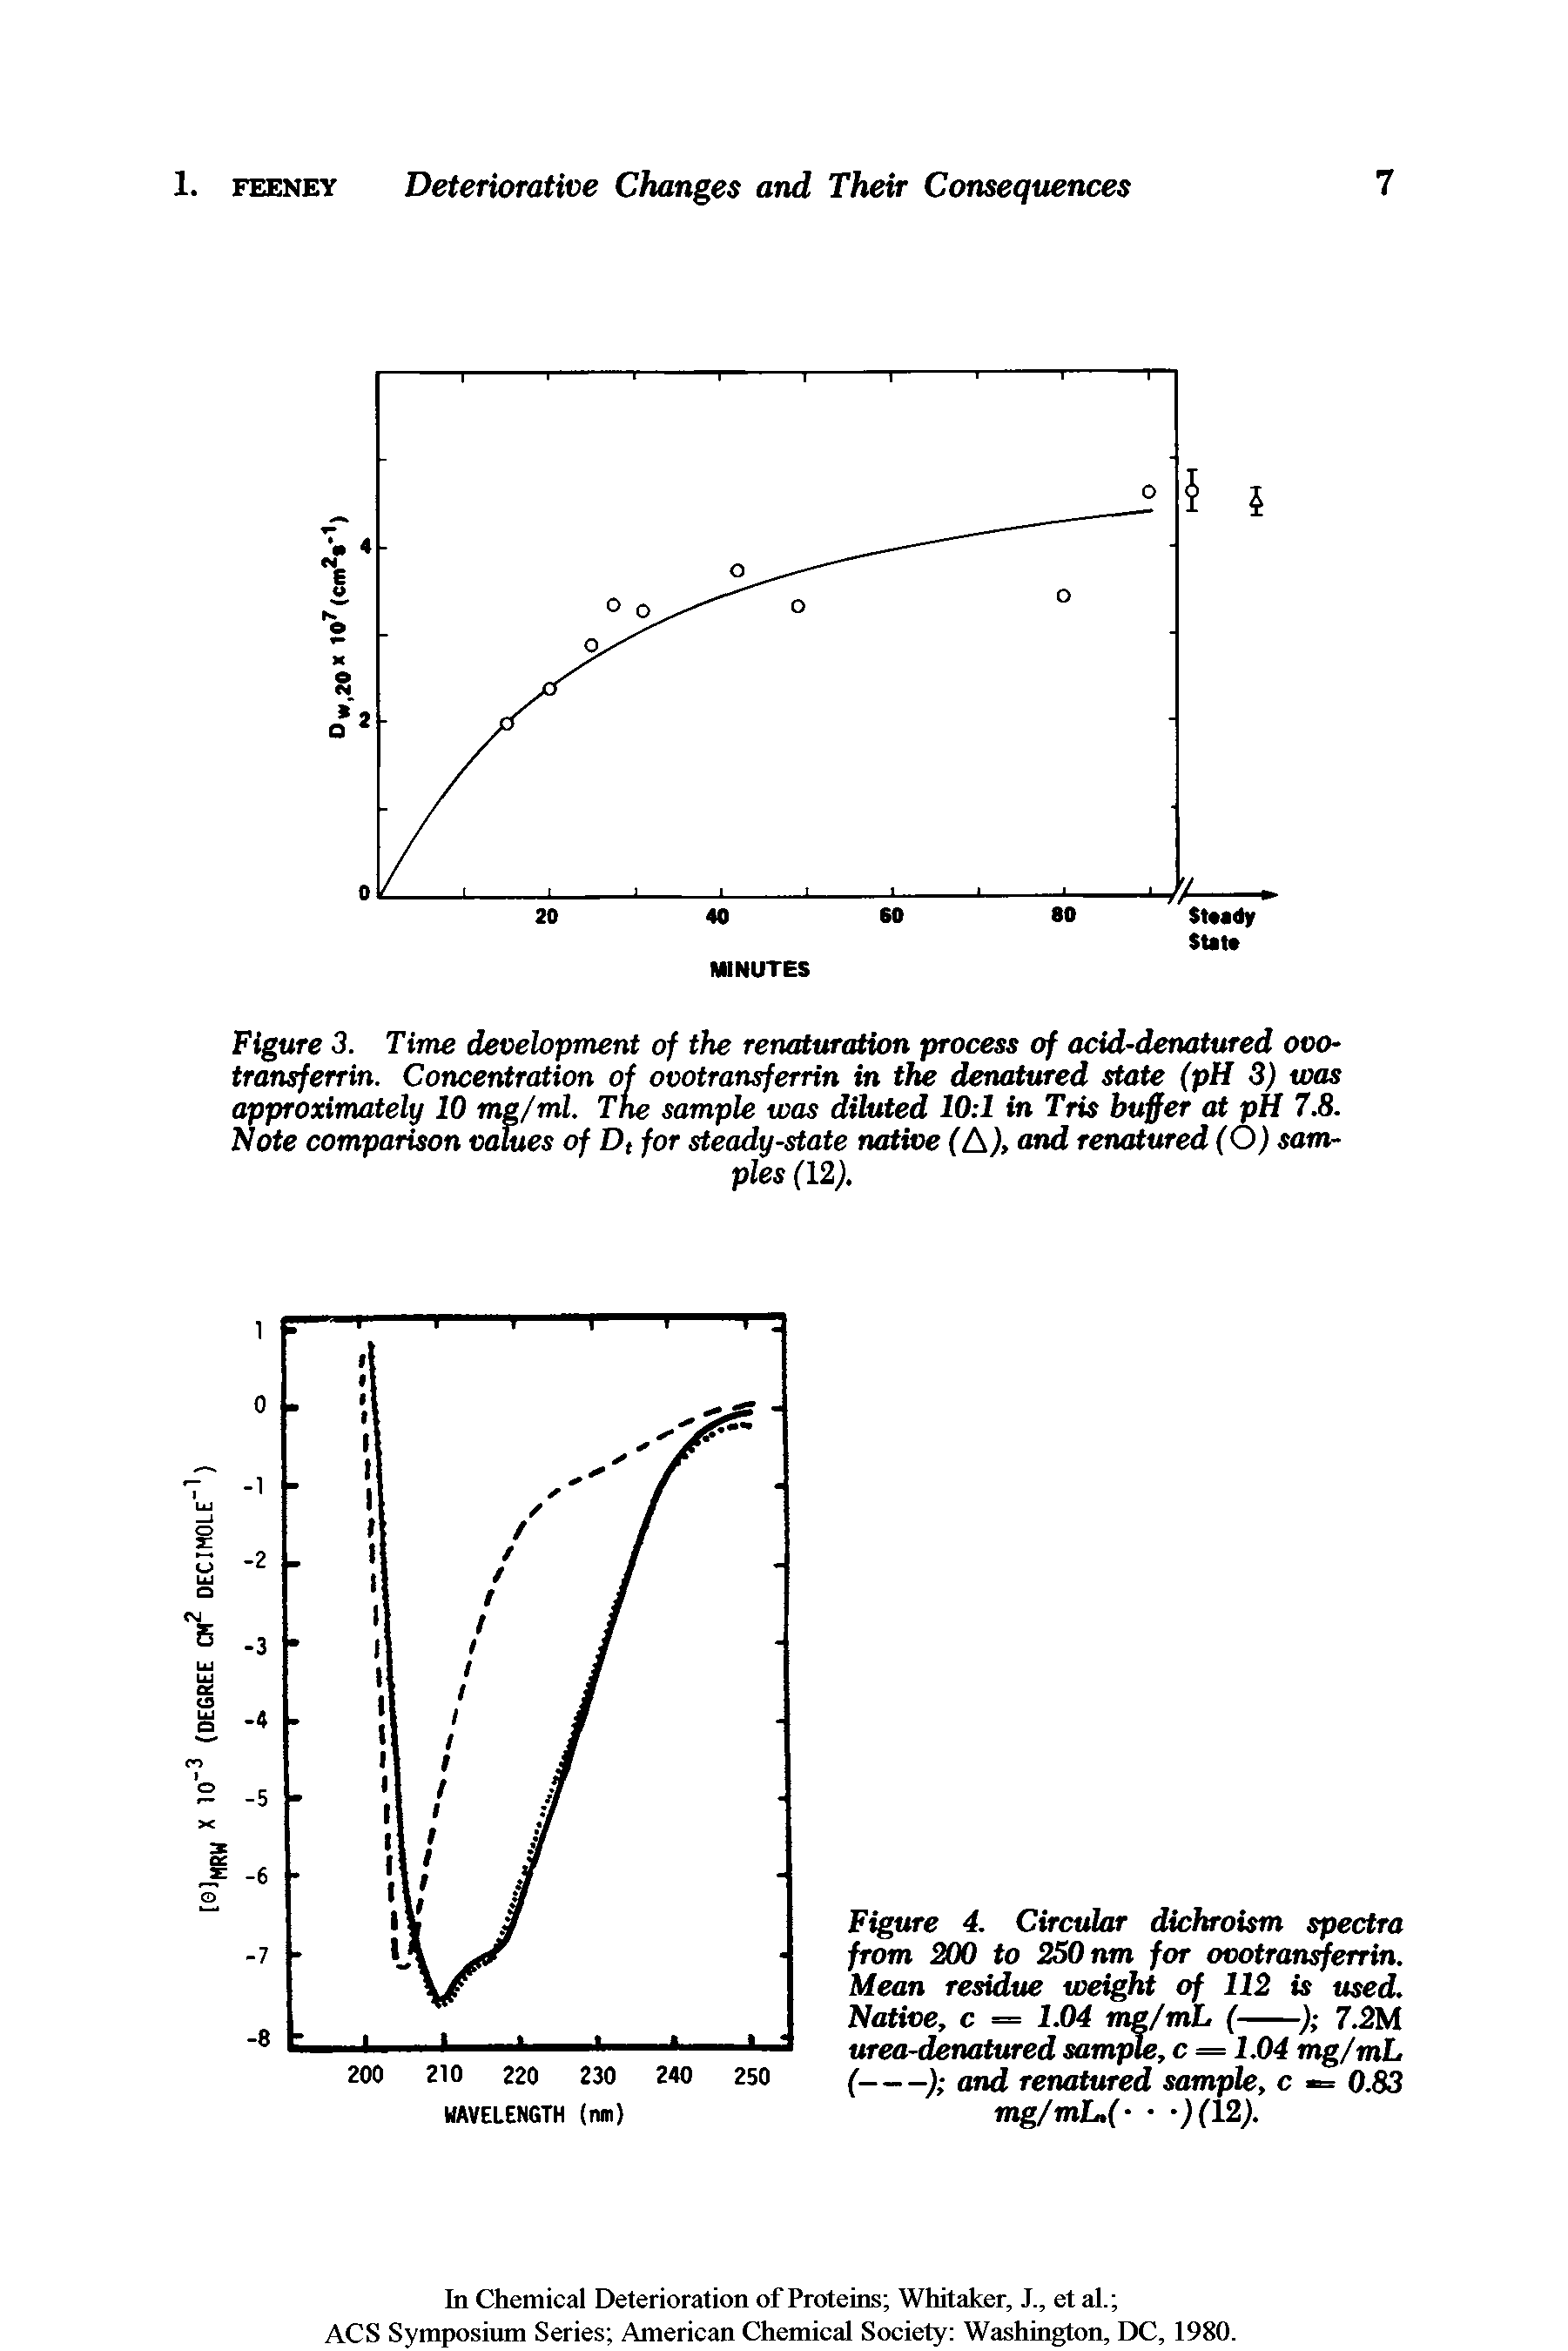 Figure 3. Time development of the renaturation process of add-denatured ooo-transferrin. Concentration of ovotransferrin in the denatured state (pH 3) was approximately 10 mg/ml. The sample was diluted 10 1 in Tris buffer at pH 7.8. Note comparison values of Dt for steady-state native (A), and renatured(O) samples (12).